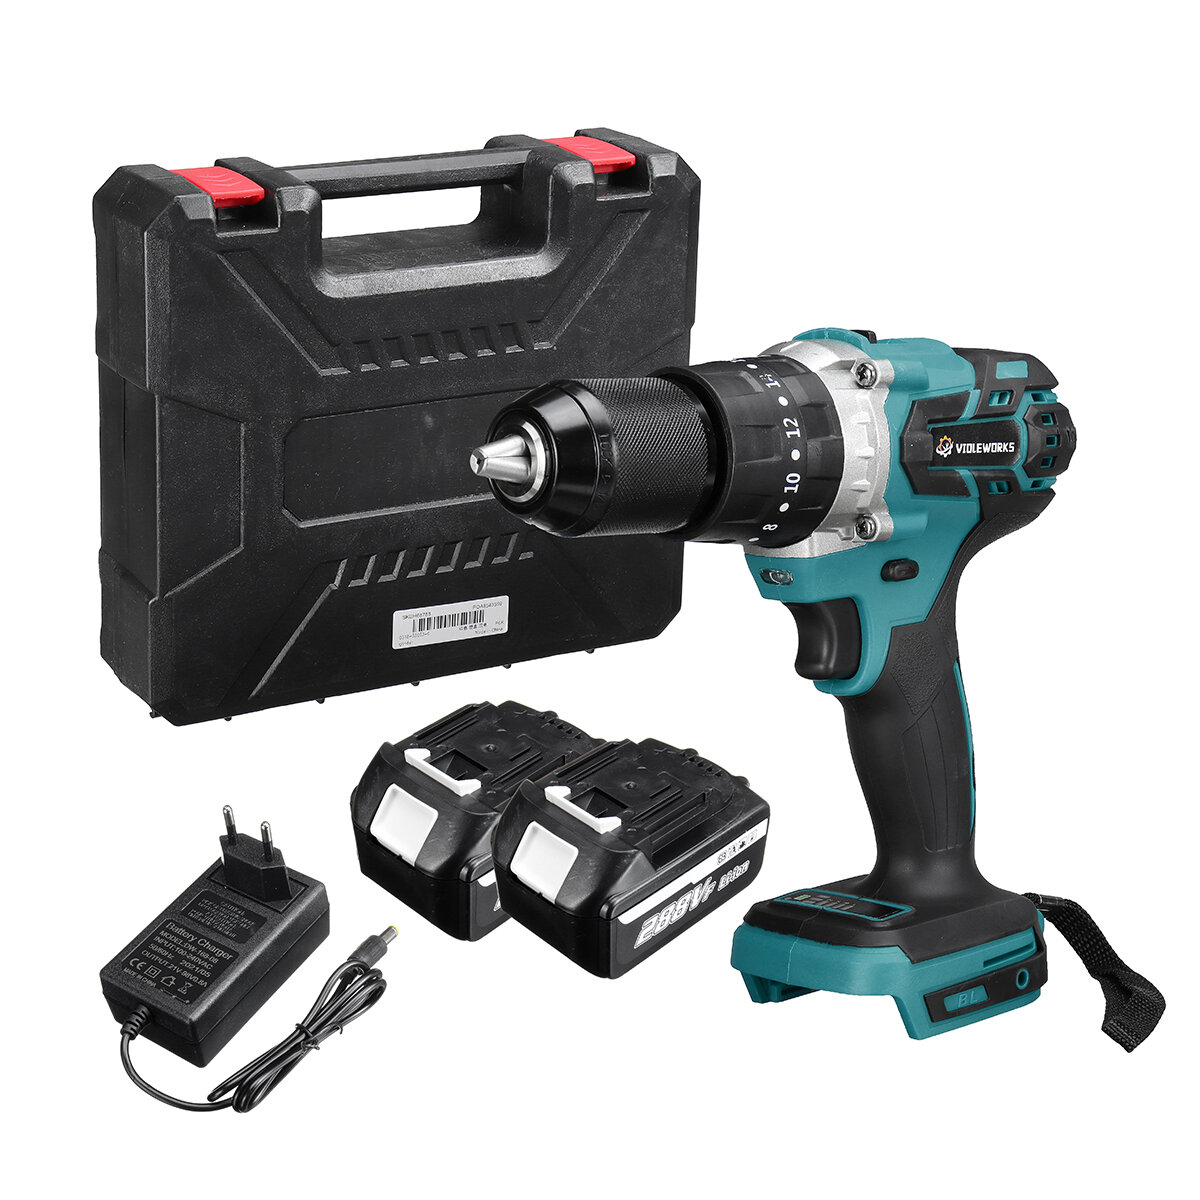 

3 IN 1 288VF 13mm Brushless Cordless Impact Drill Screwdriver Hammer Drill W/ 1/2pcs Battery For Makita